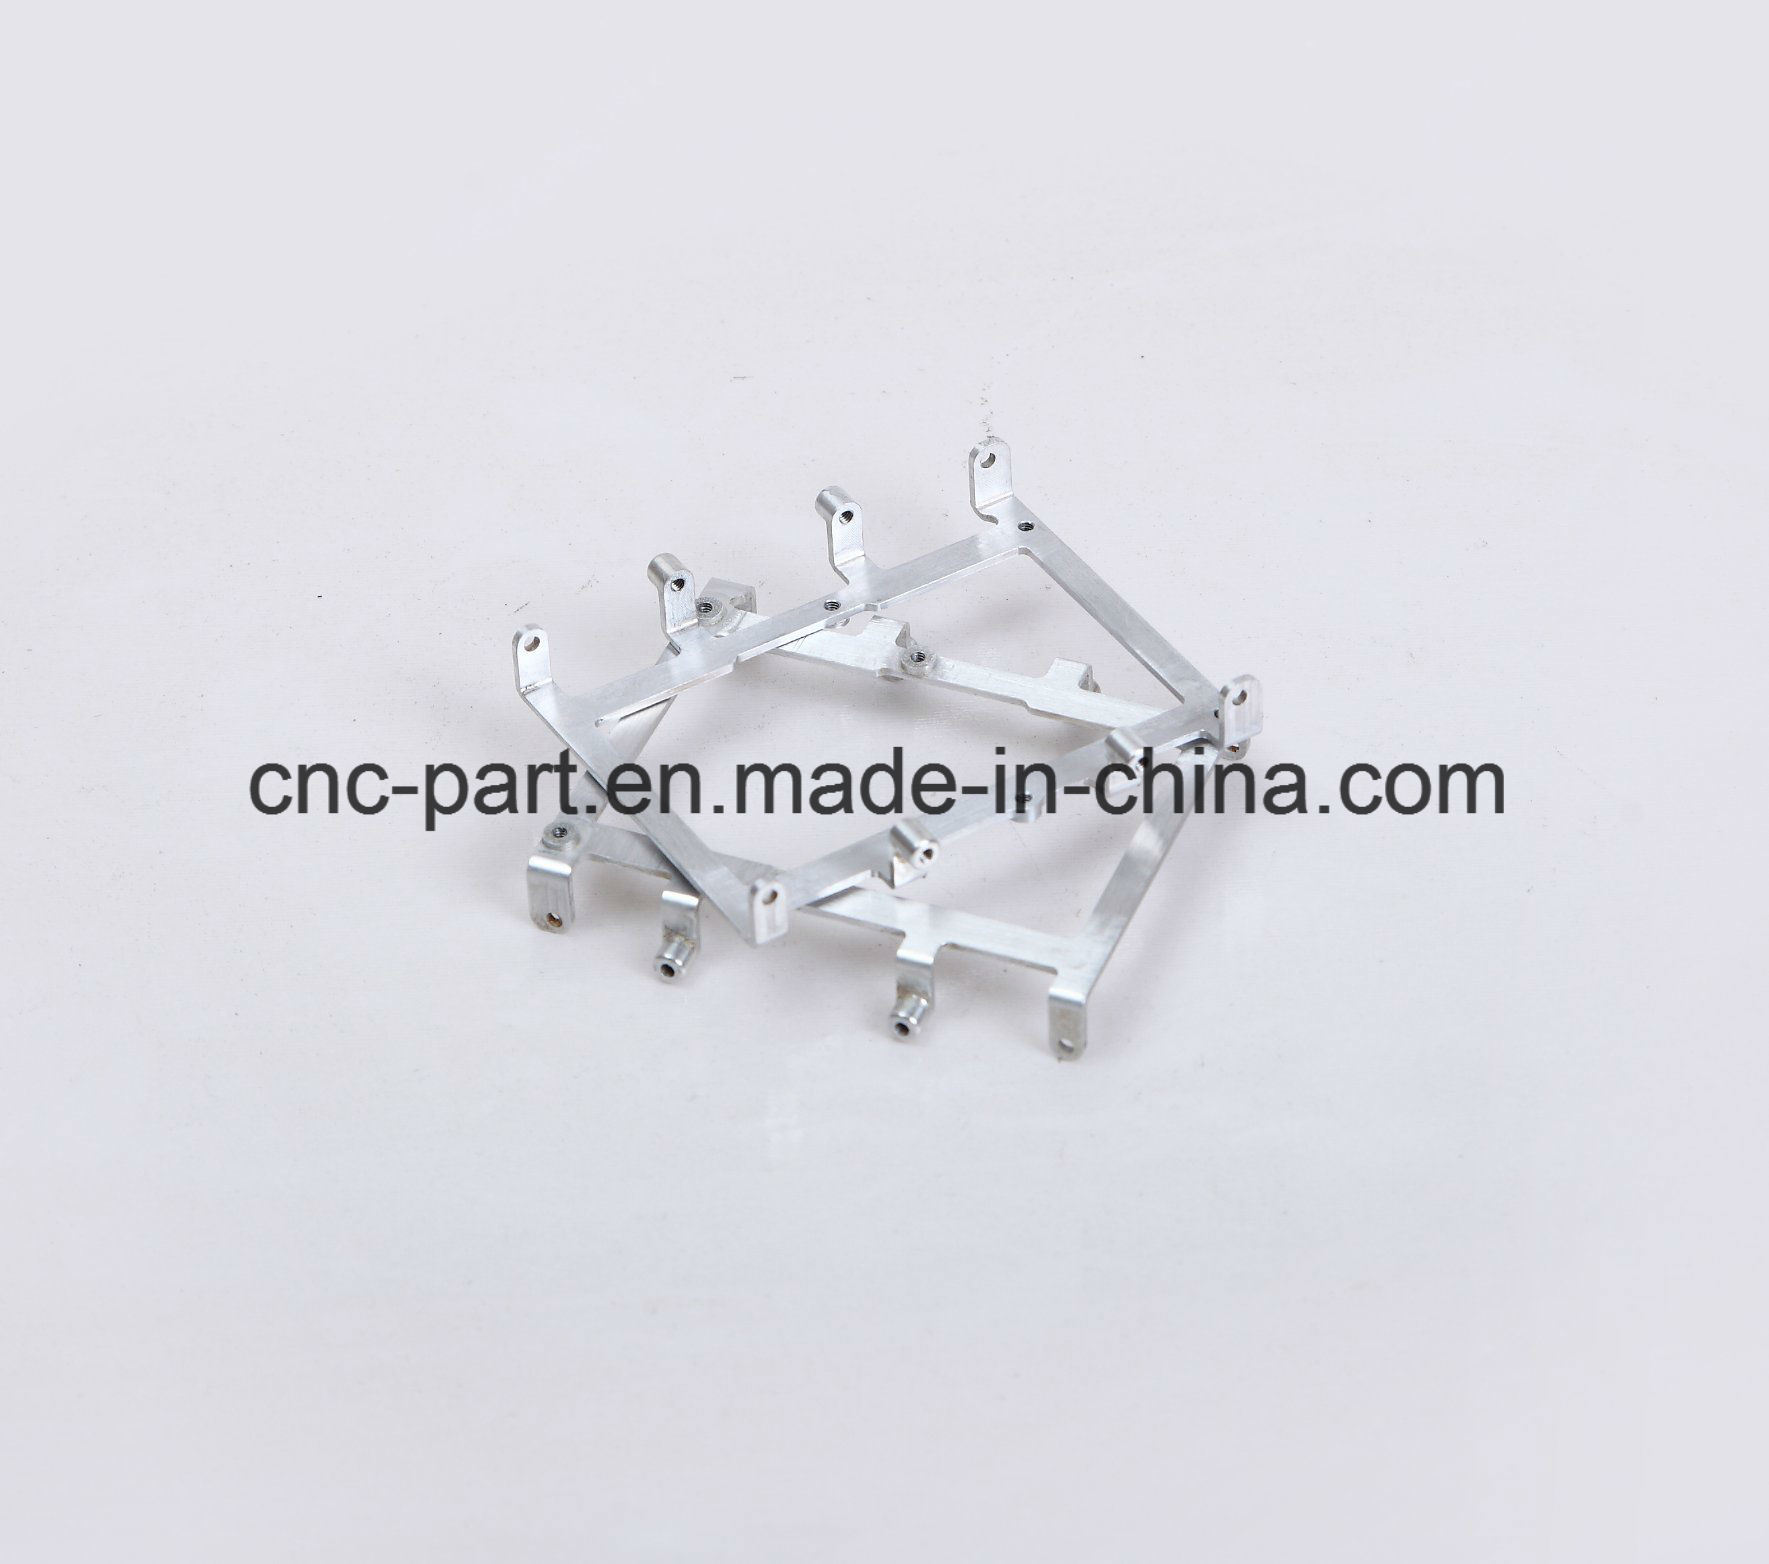 China Material Stainless Steel CNC Machinery for Car Parts